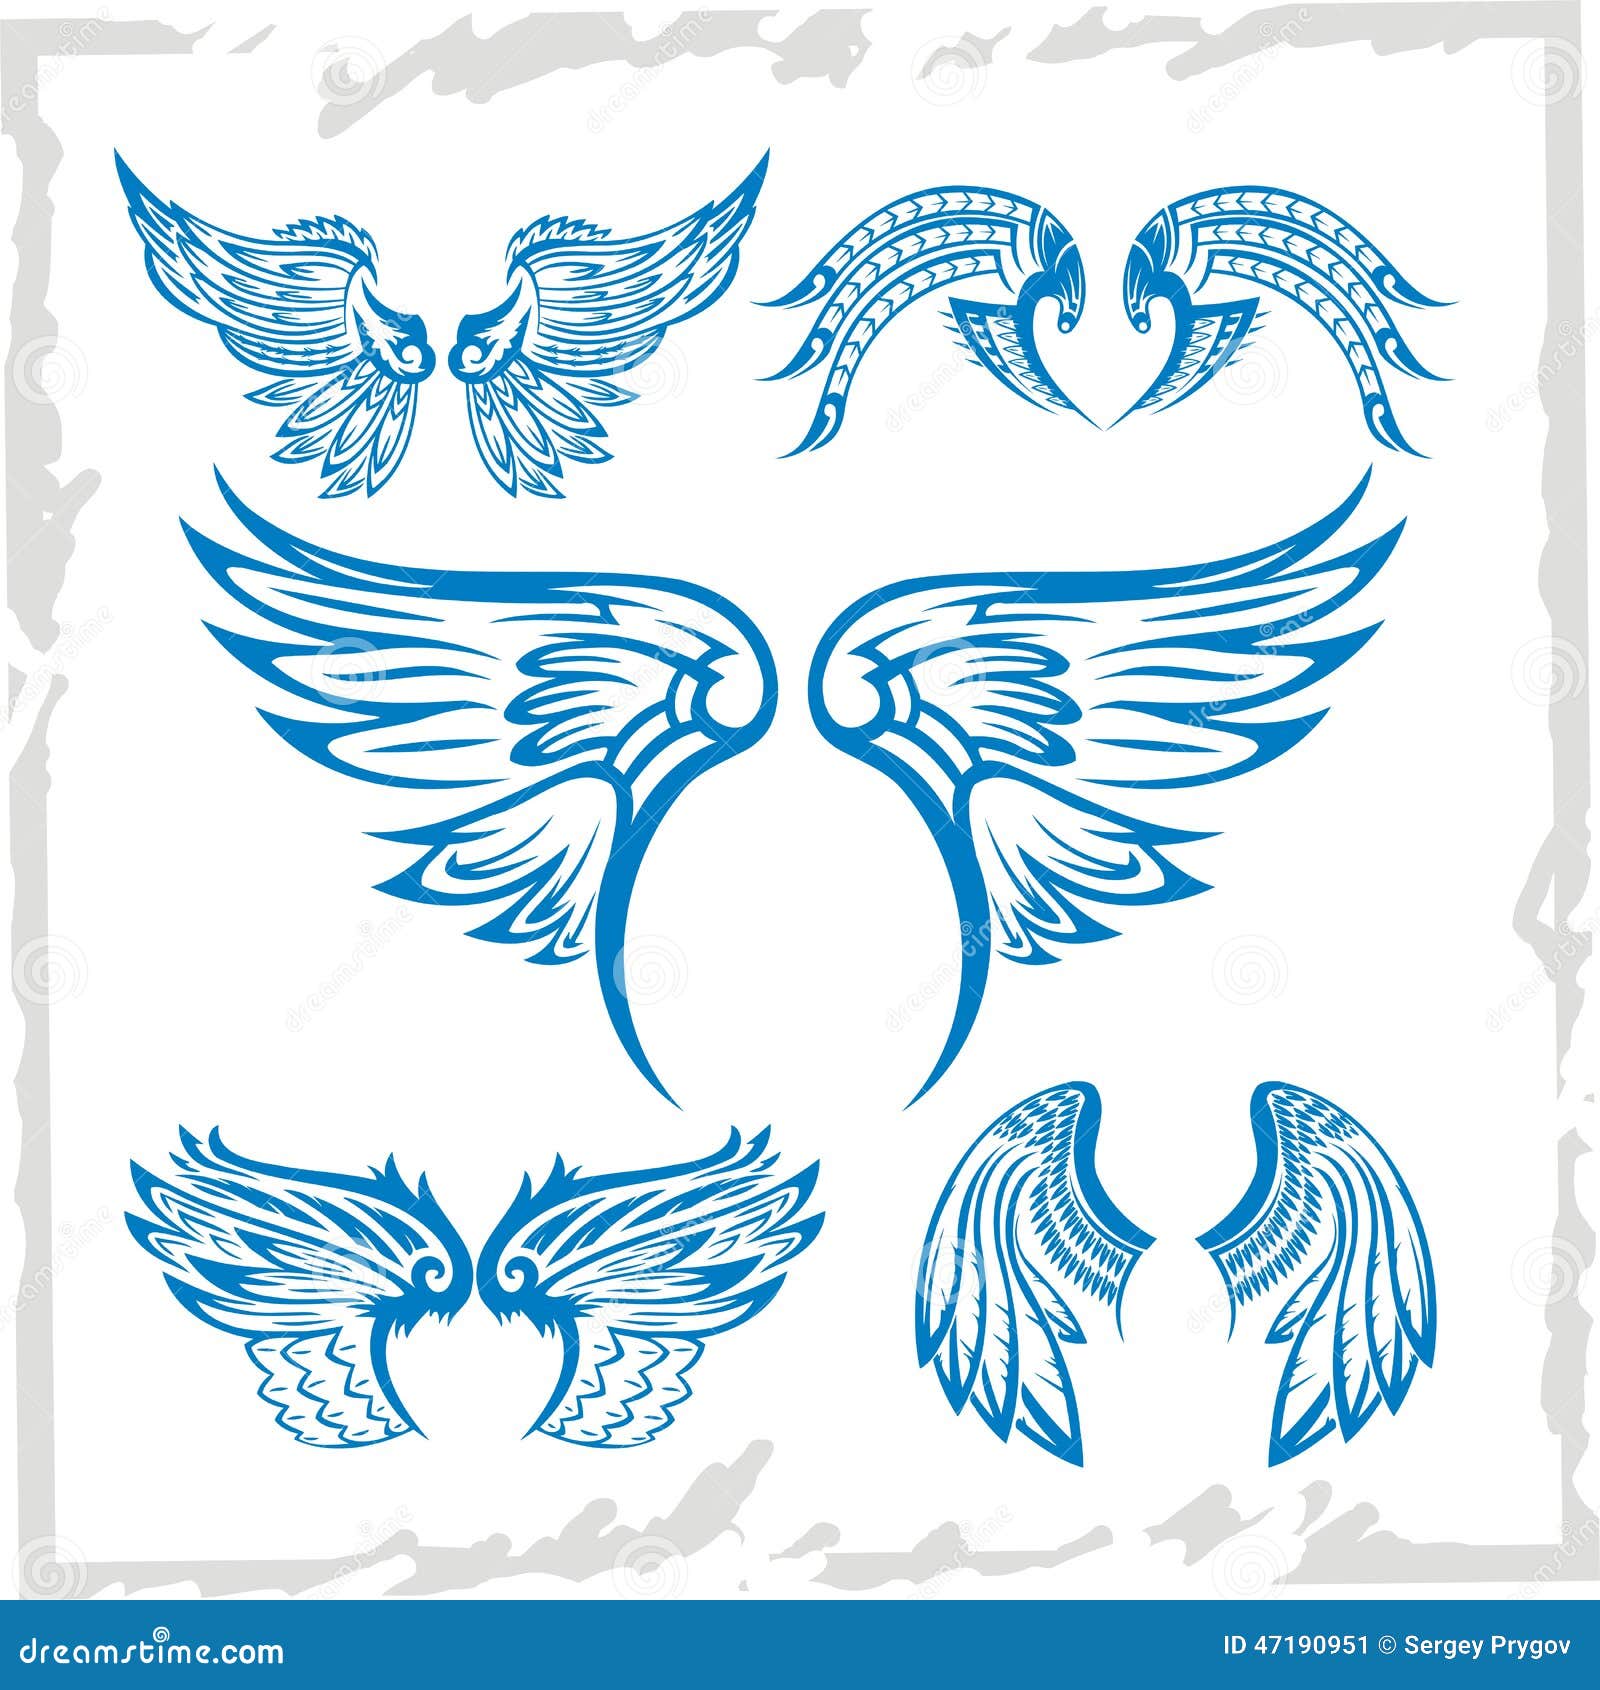 vinyl ready vector clipart free download - photo #18